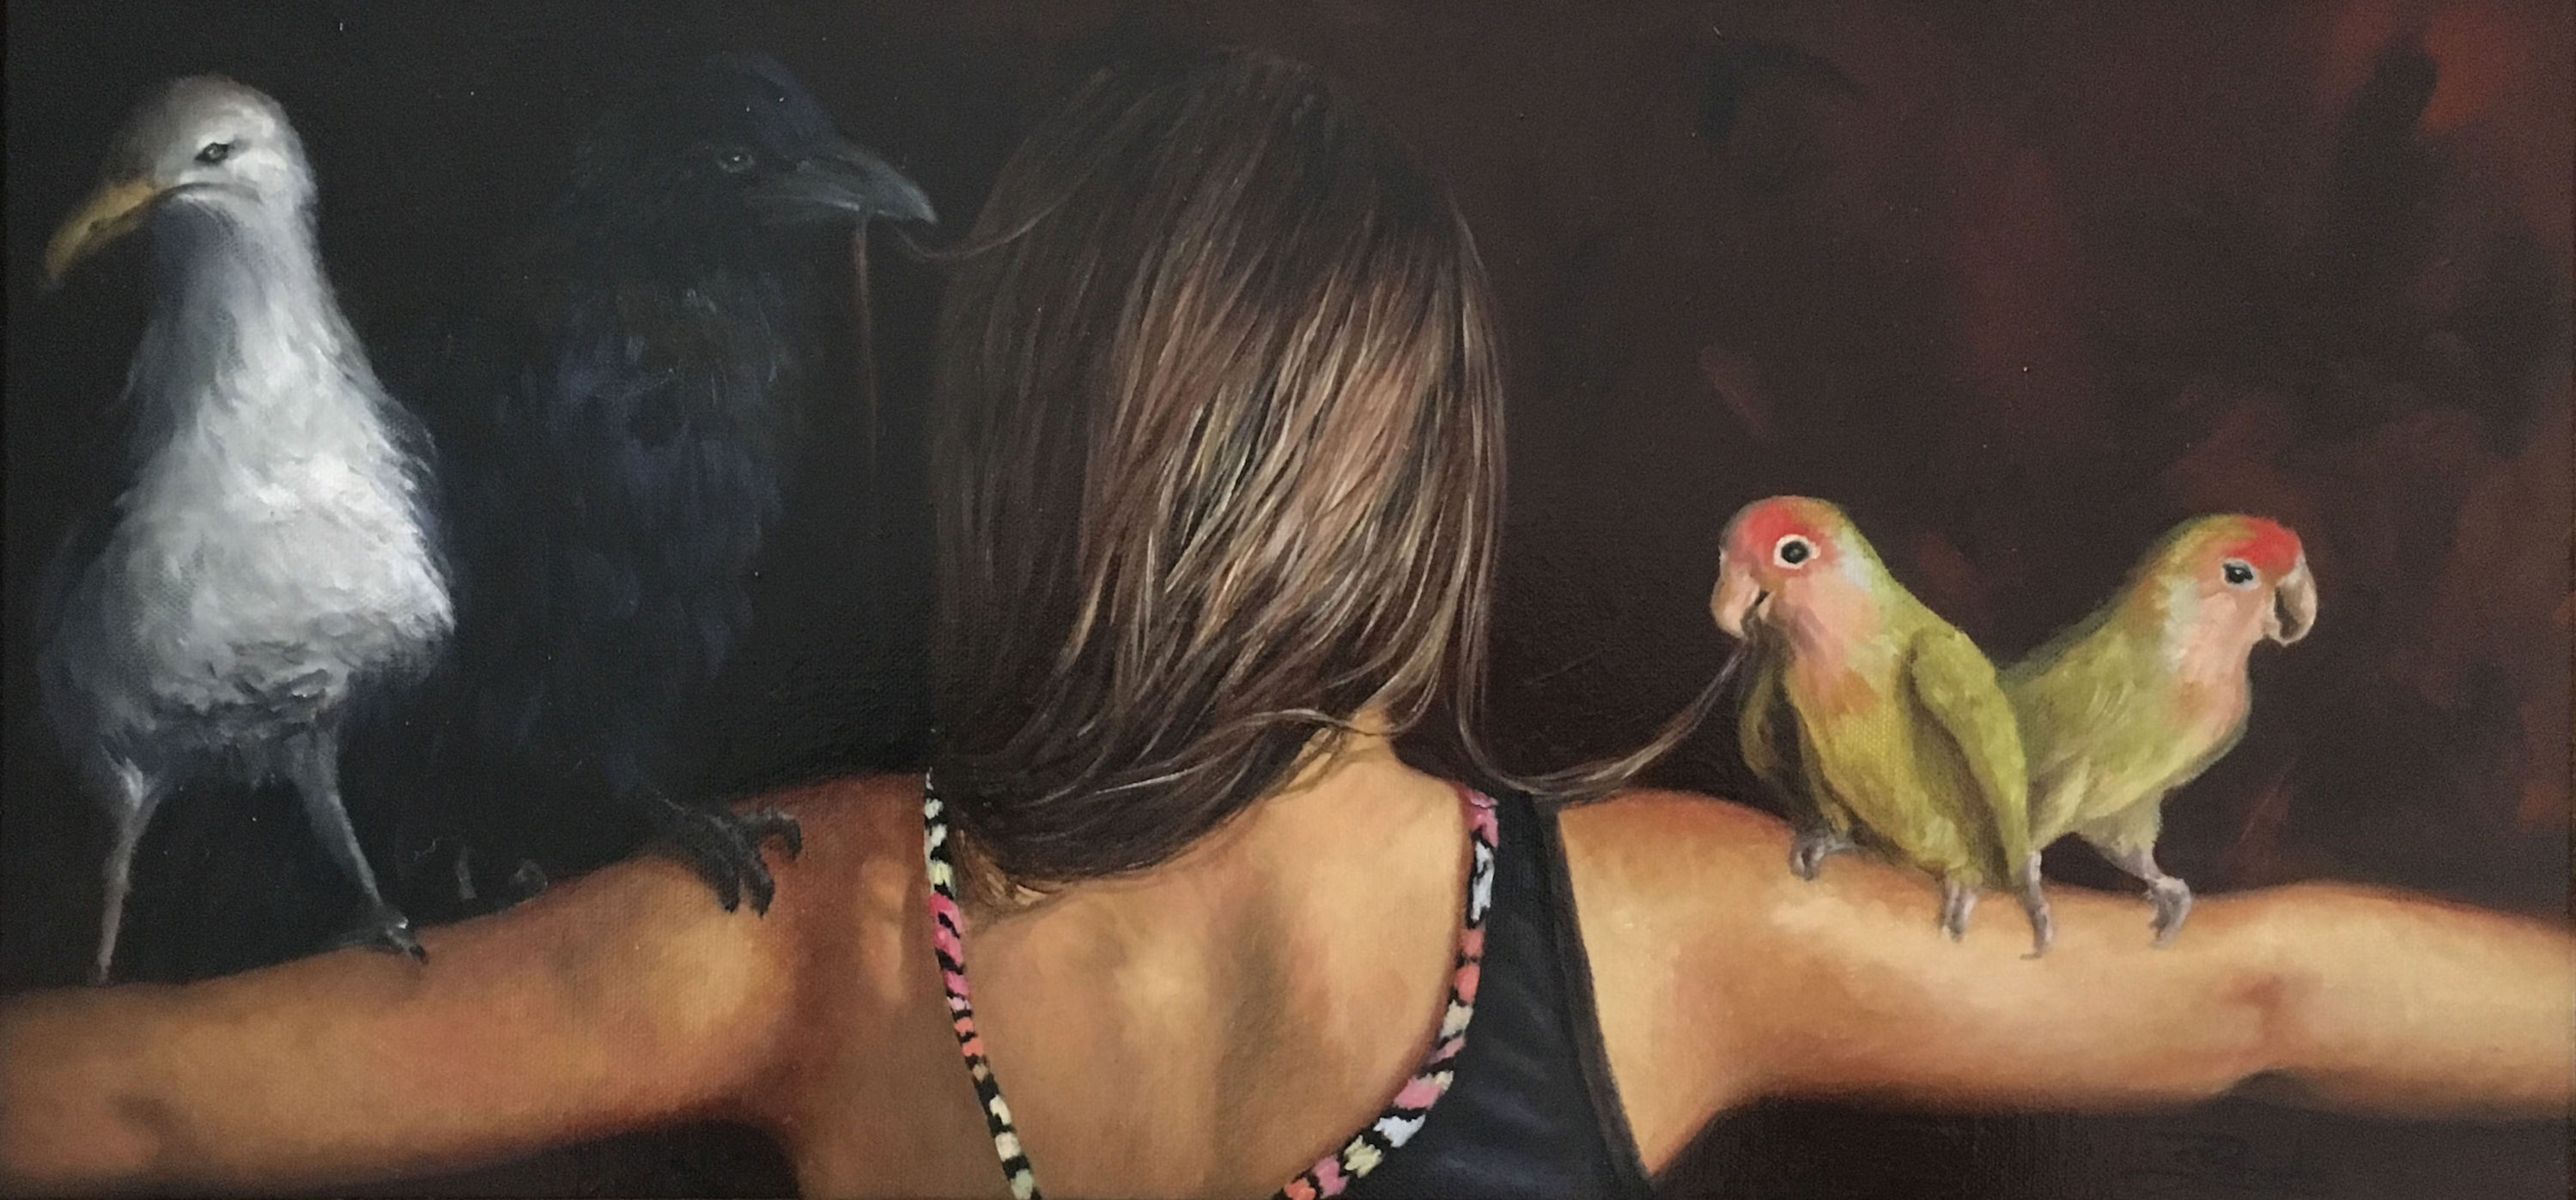 Pastel paintings by Sharon Pomales Tousey - RealismToday.com